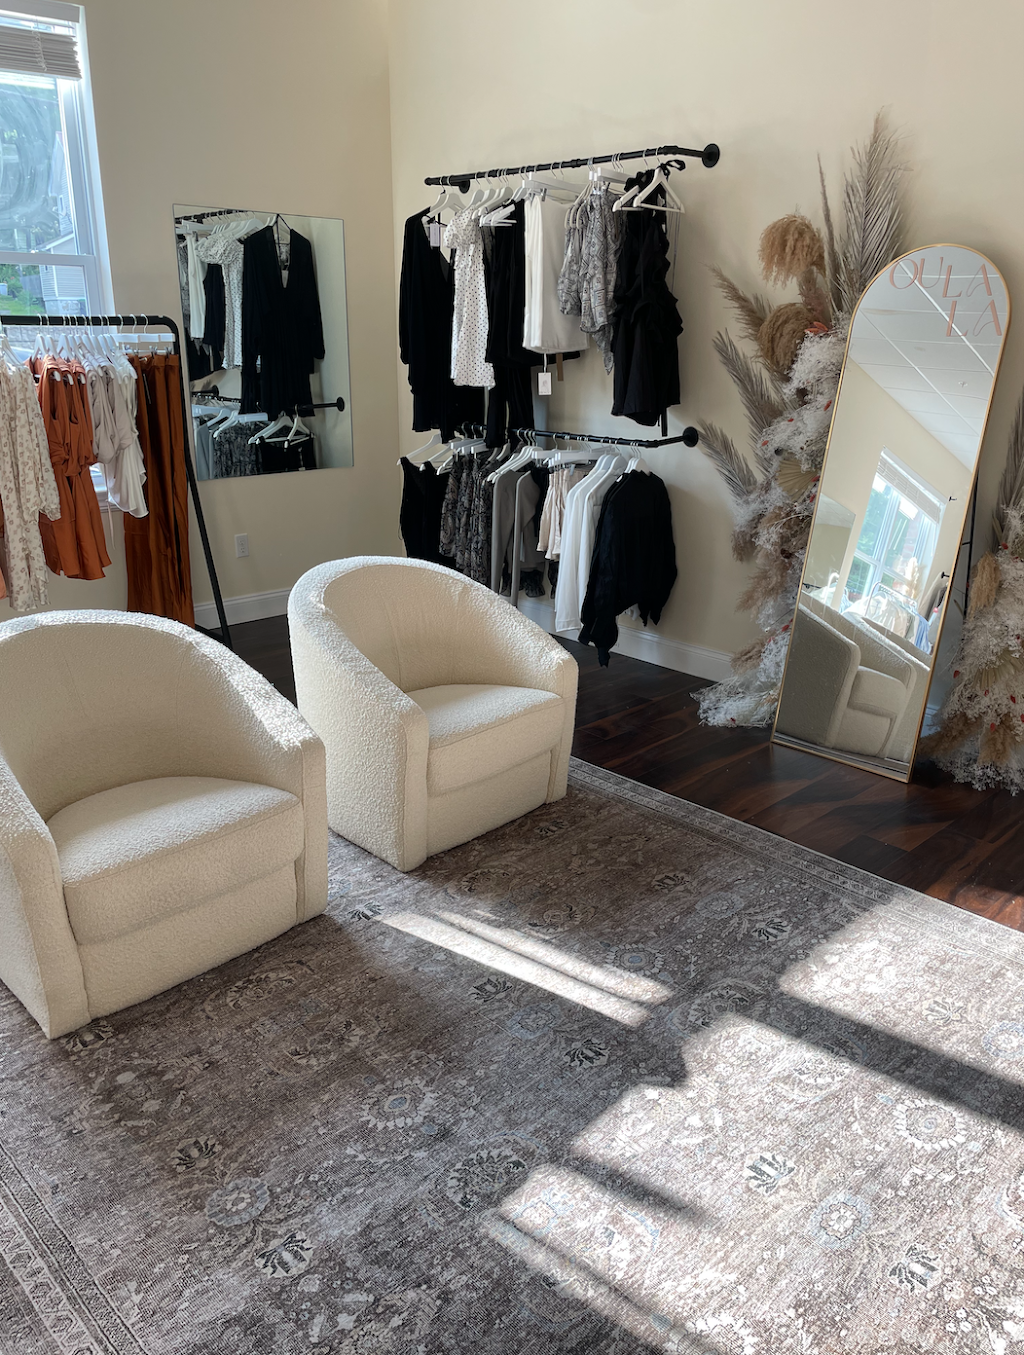 Rio + co | 20 Spring St Suite 3, Warwick, NY 10990 | Phone: (929) 239-7526